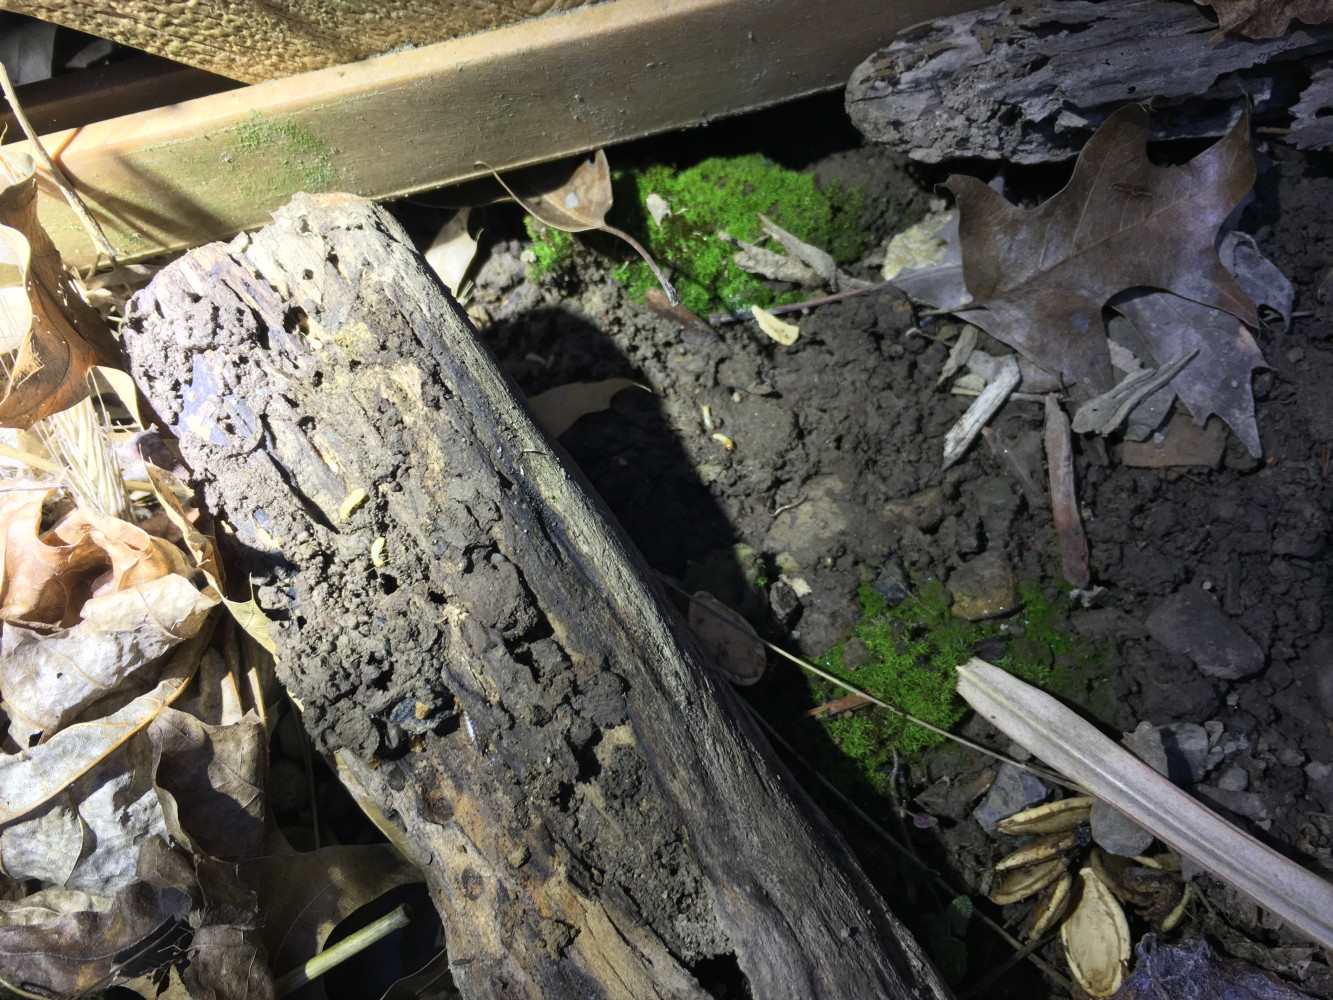 If you look closely you can see the white termite workers in the soil and on the log. 